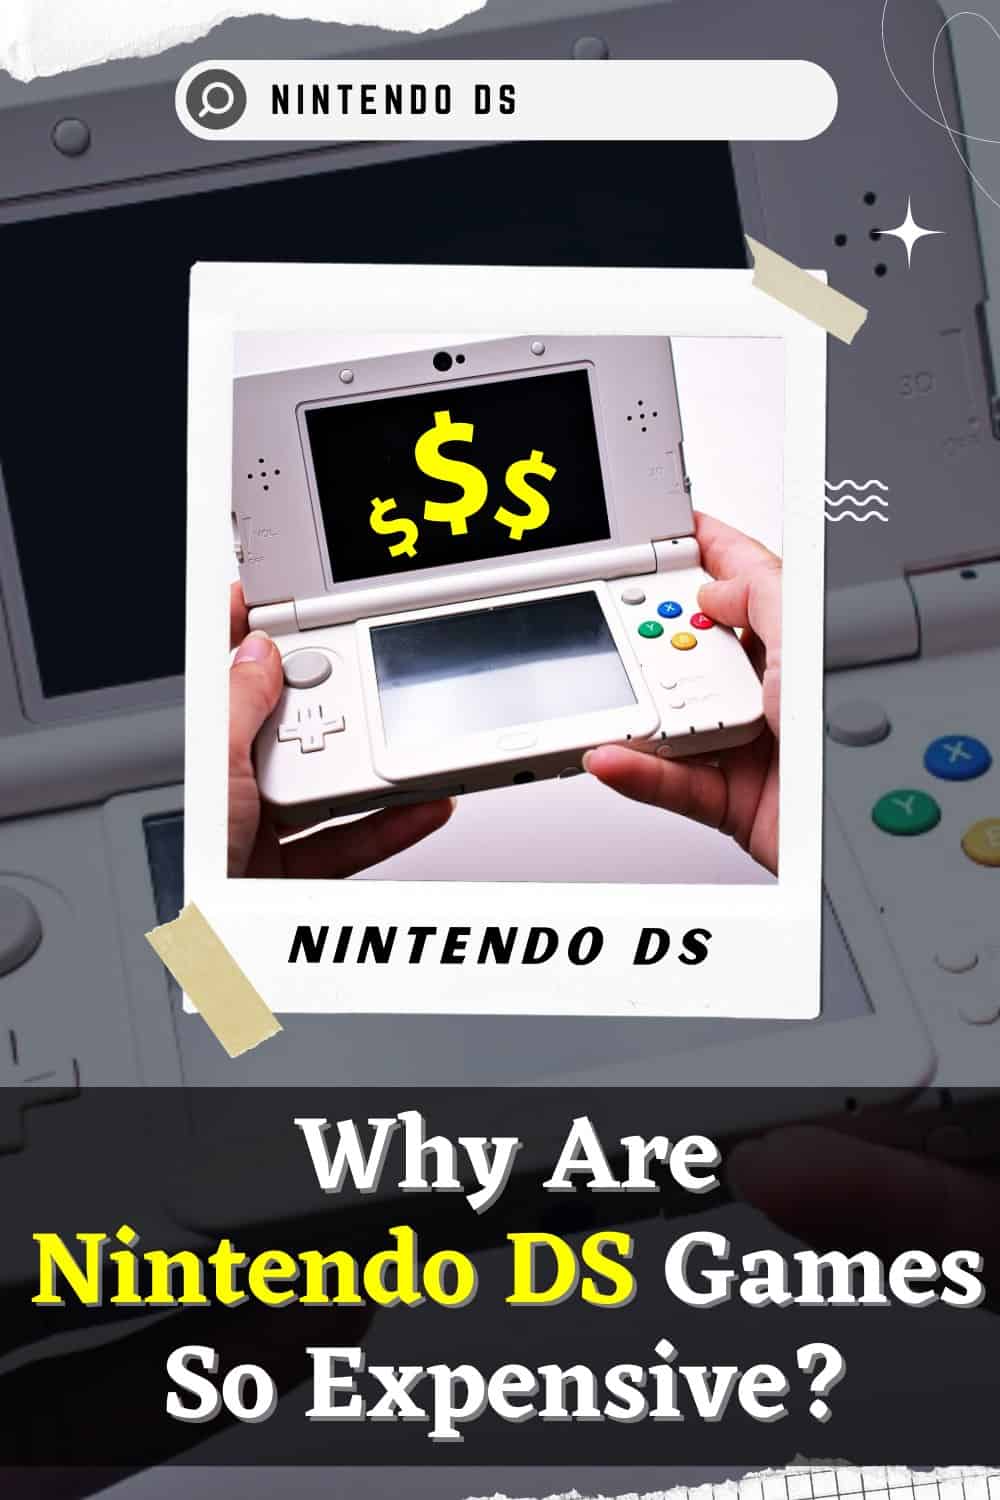 Nintendo DS games are expensive because they are still in high demand